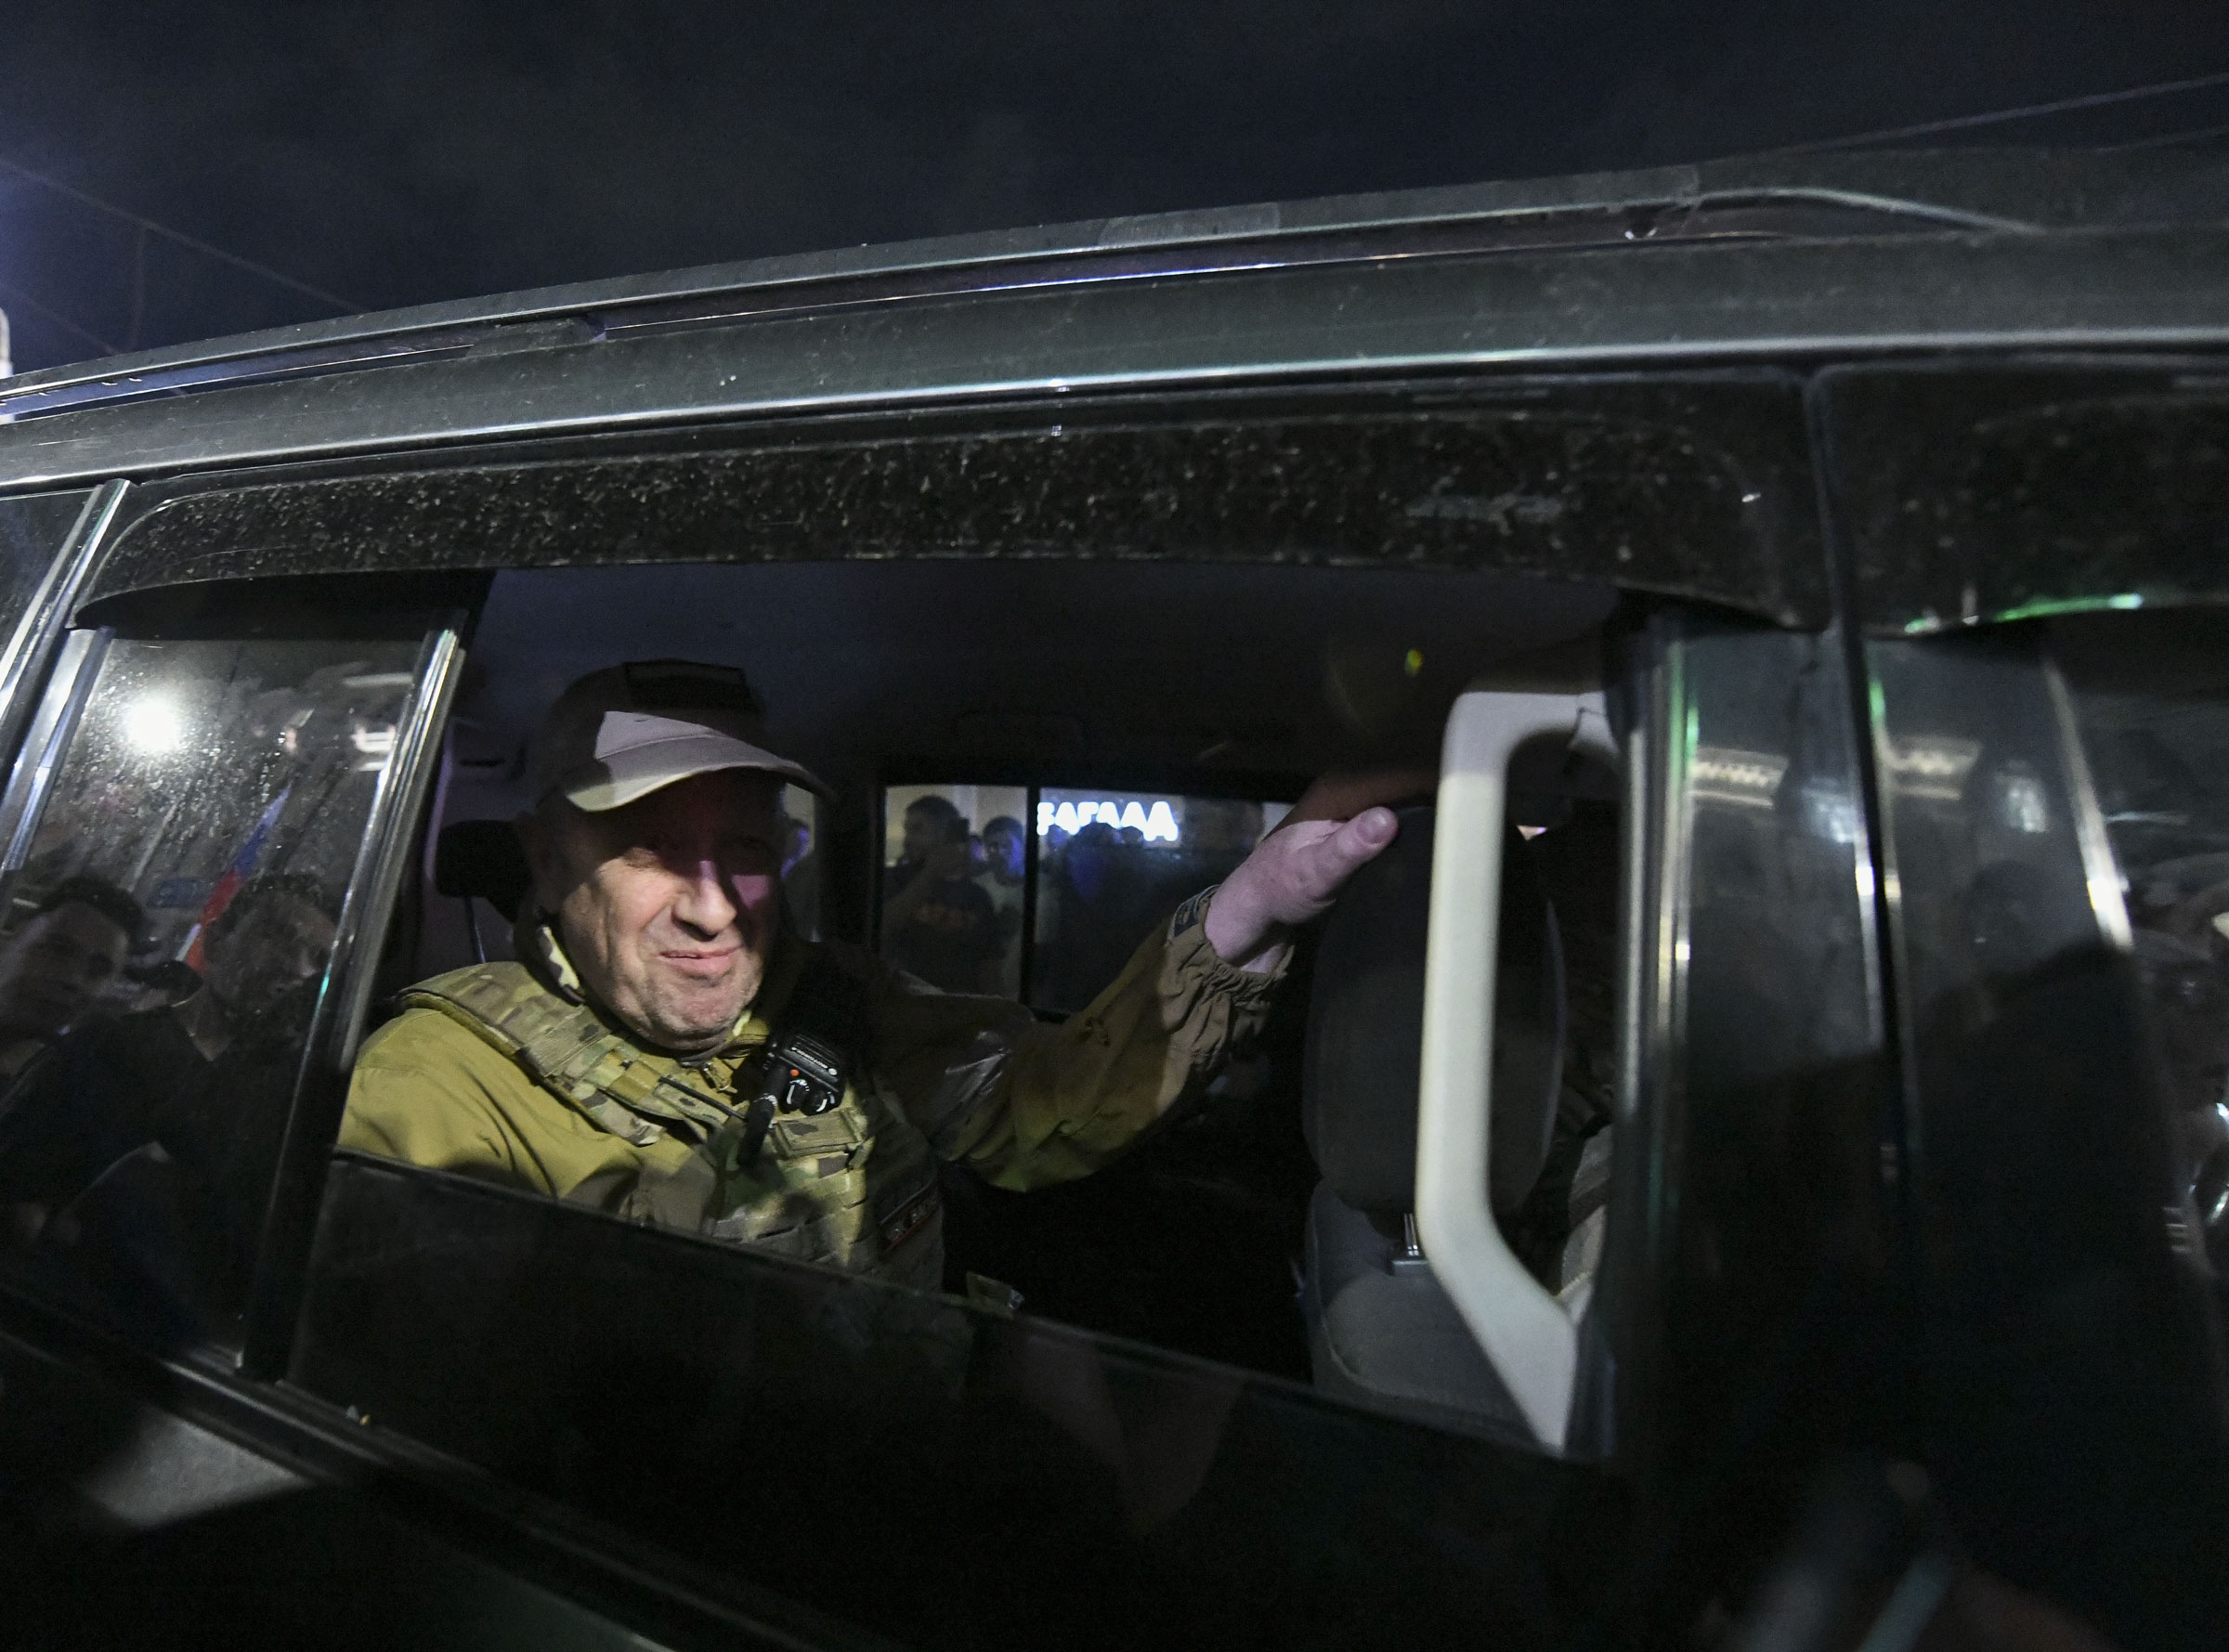 Head of the Wagner Group Yevgeny Prigozhin leaving the Southern Military District headquarters in Rostov-on-Don, Russia, on June 24, 2023. (Stringer/Anadolu Agency/Getty Images)